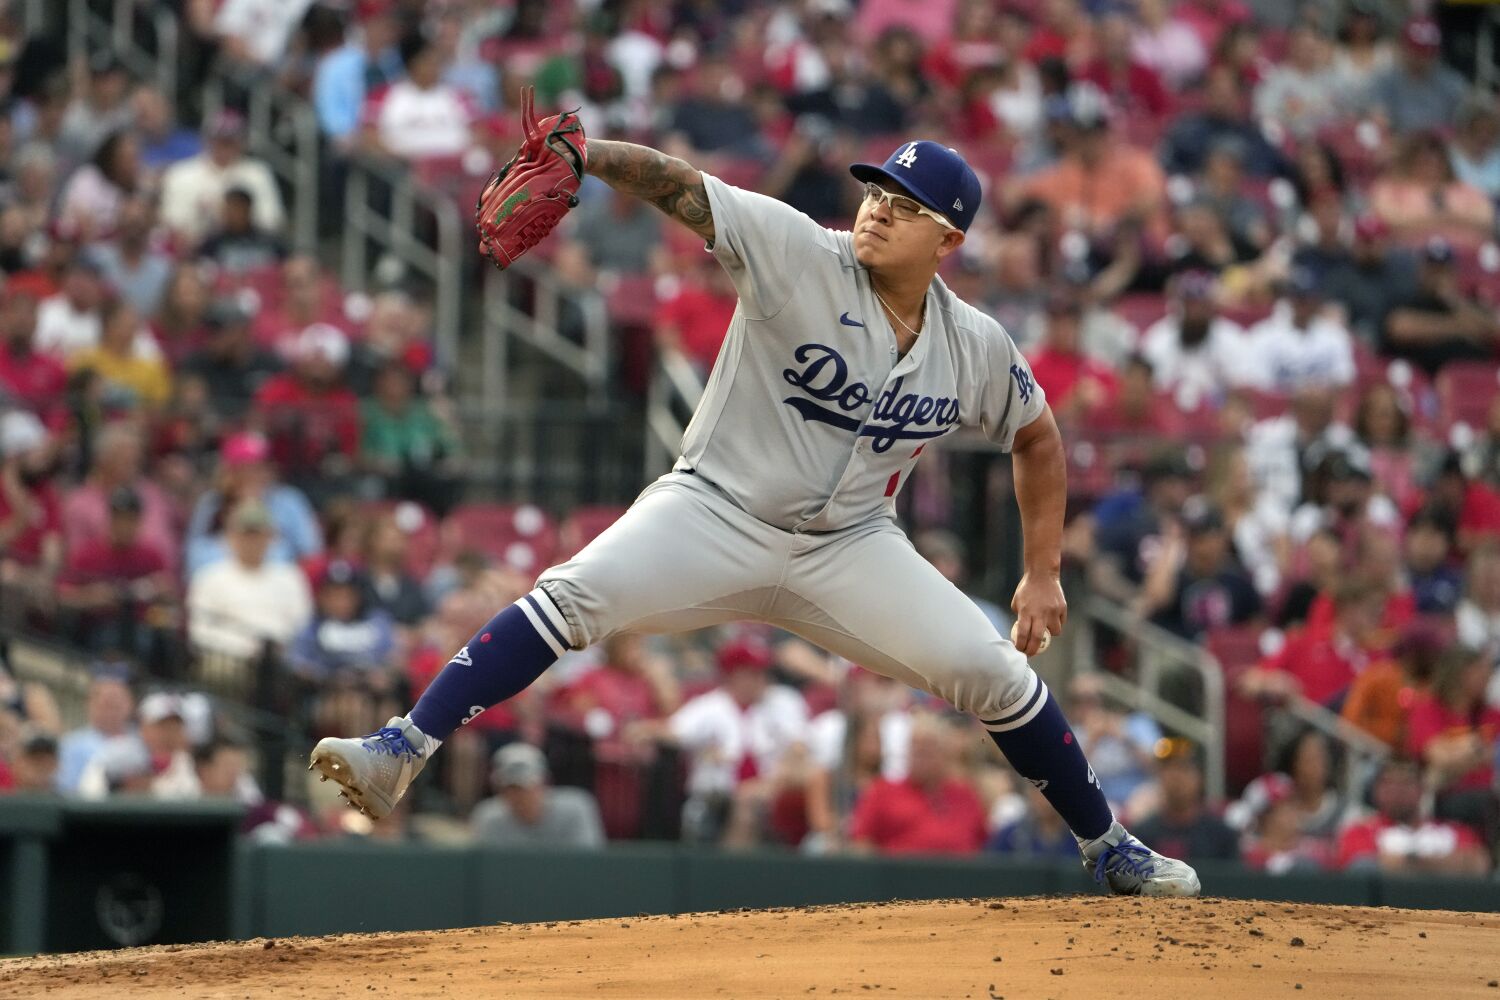 Another Dodgers pitcher injury: Julio Urías lands on IL with hamstring strain